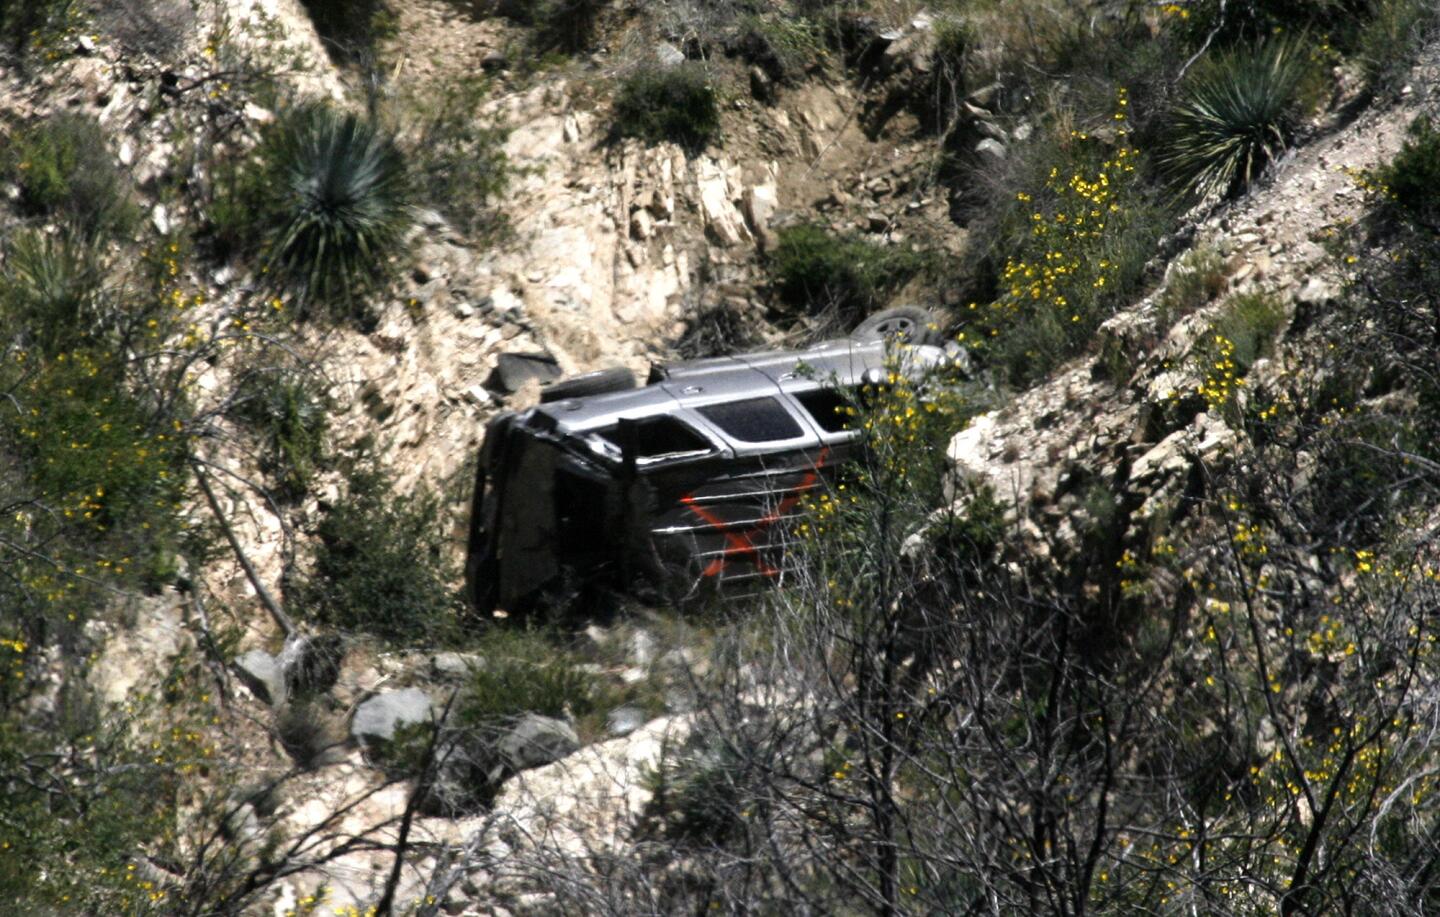 Stolen car found crashed in Angeles National Forest